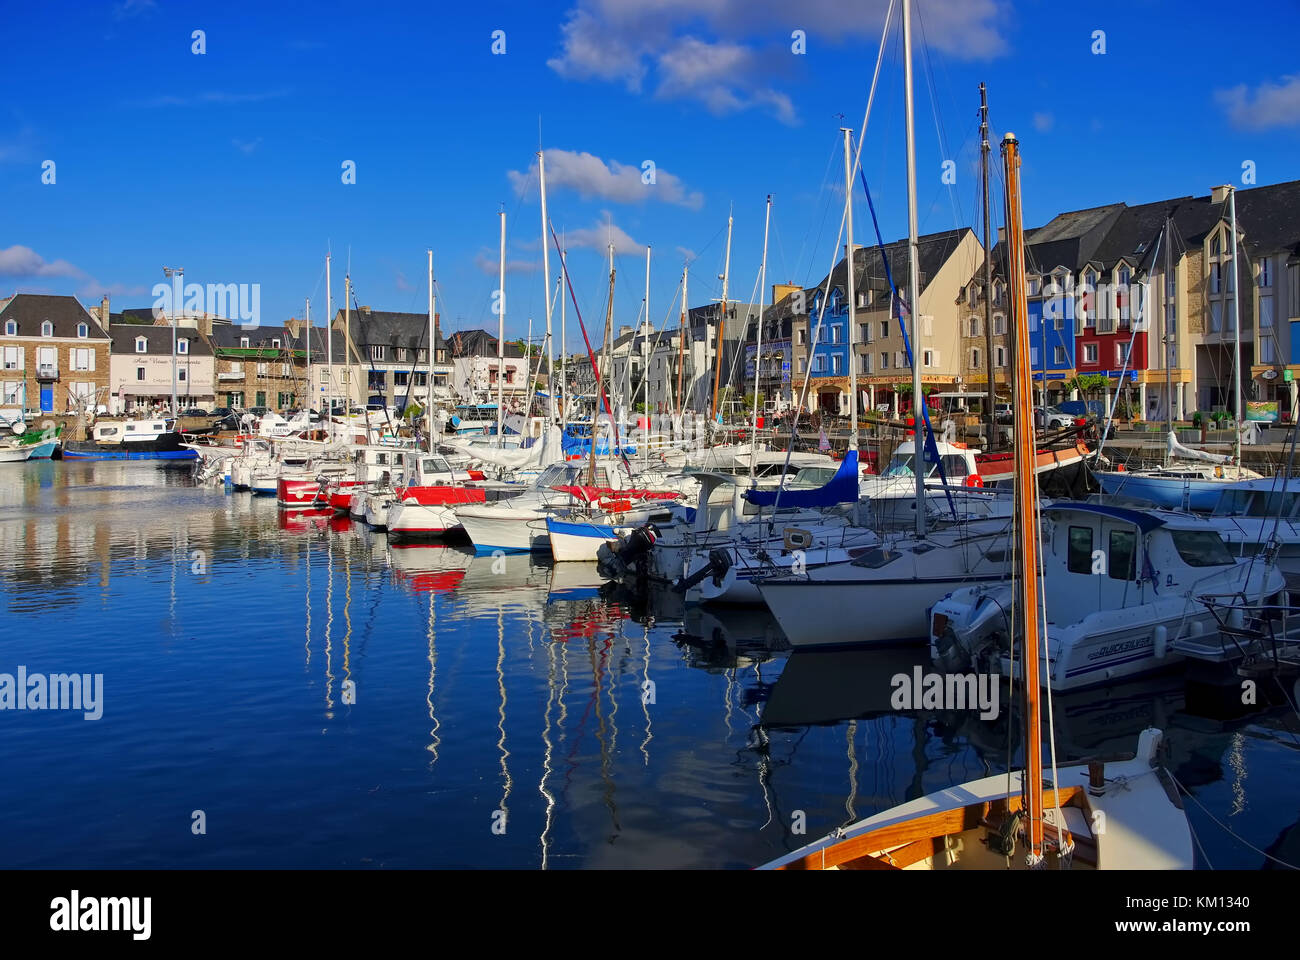 Paimpol, yachts in the Port of Paimpol, France in Brittany Stock Photo